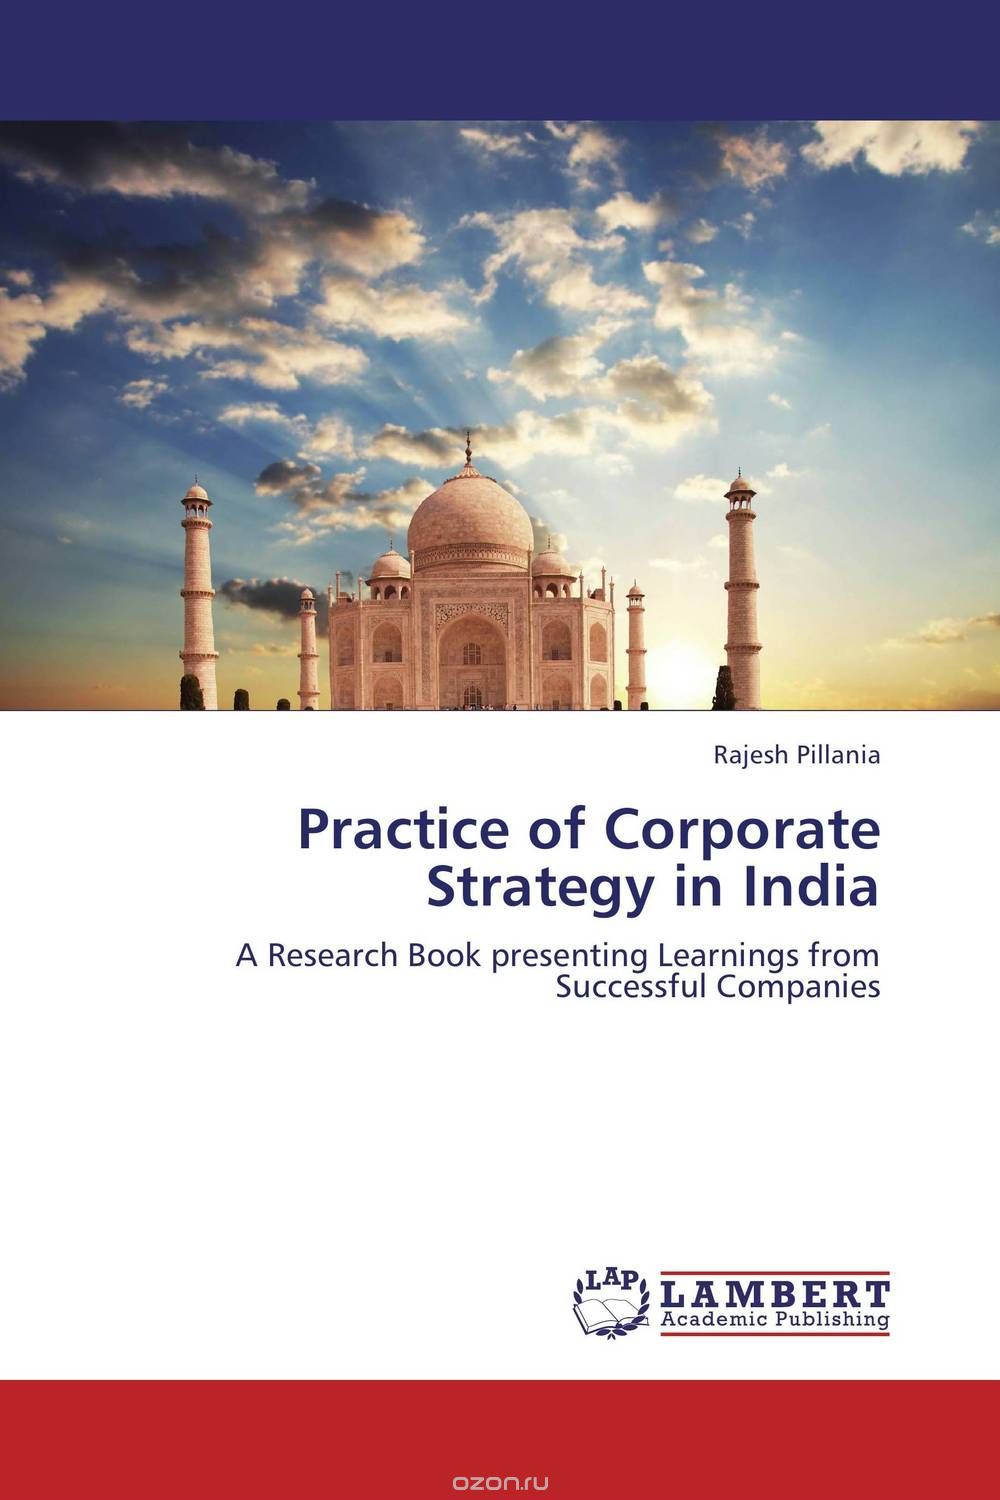 Practice of Corporate Strategy in India